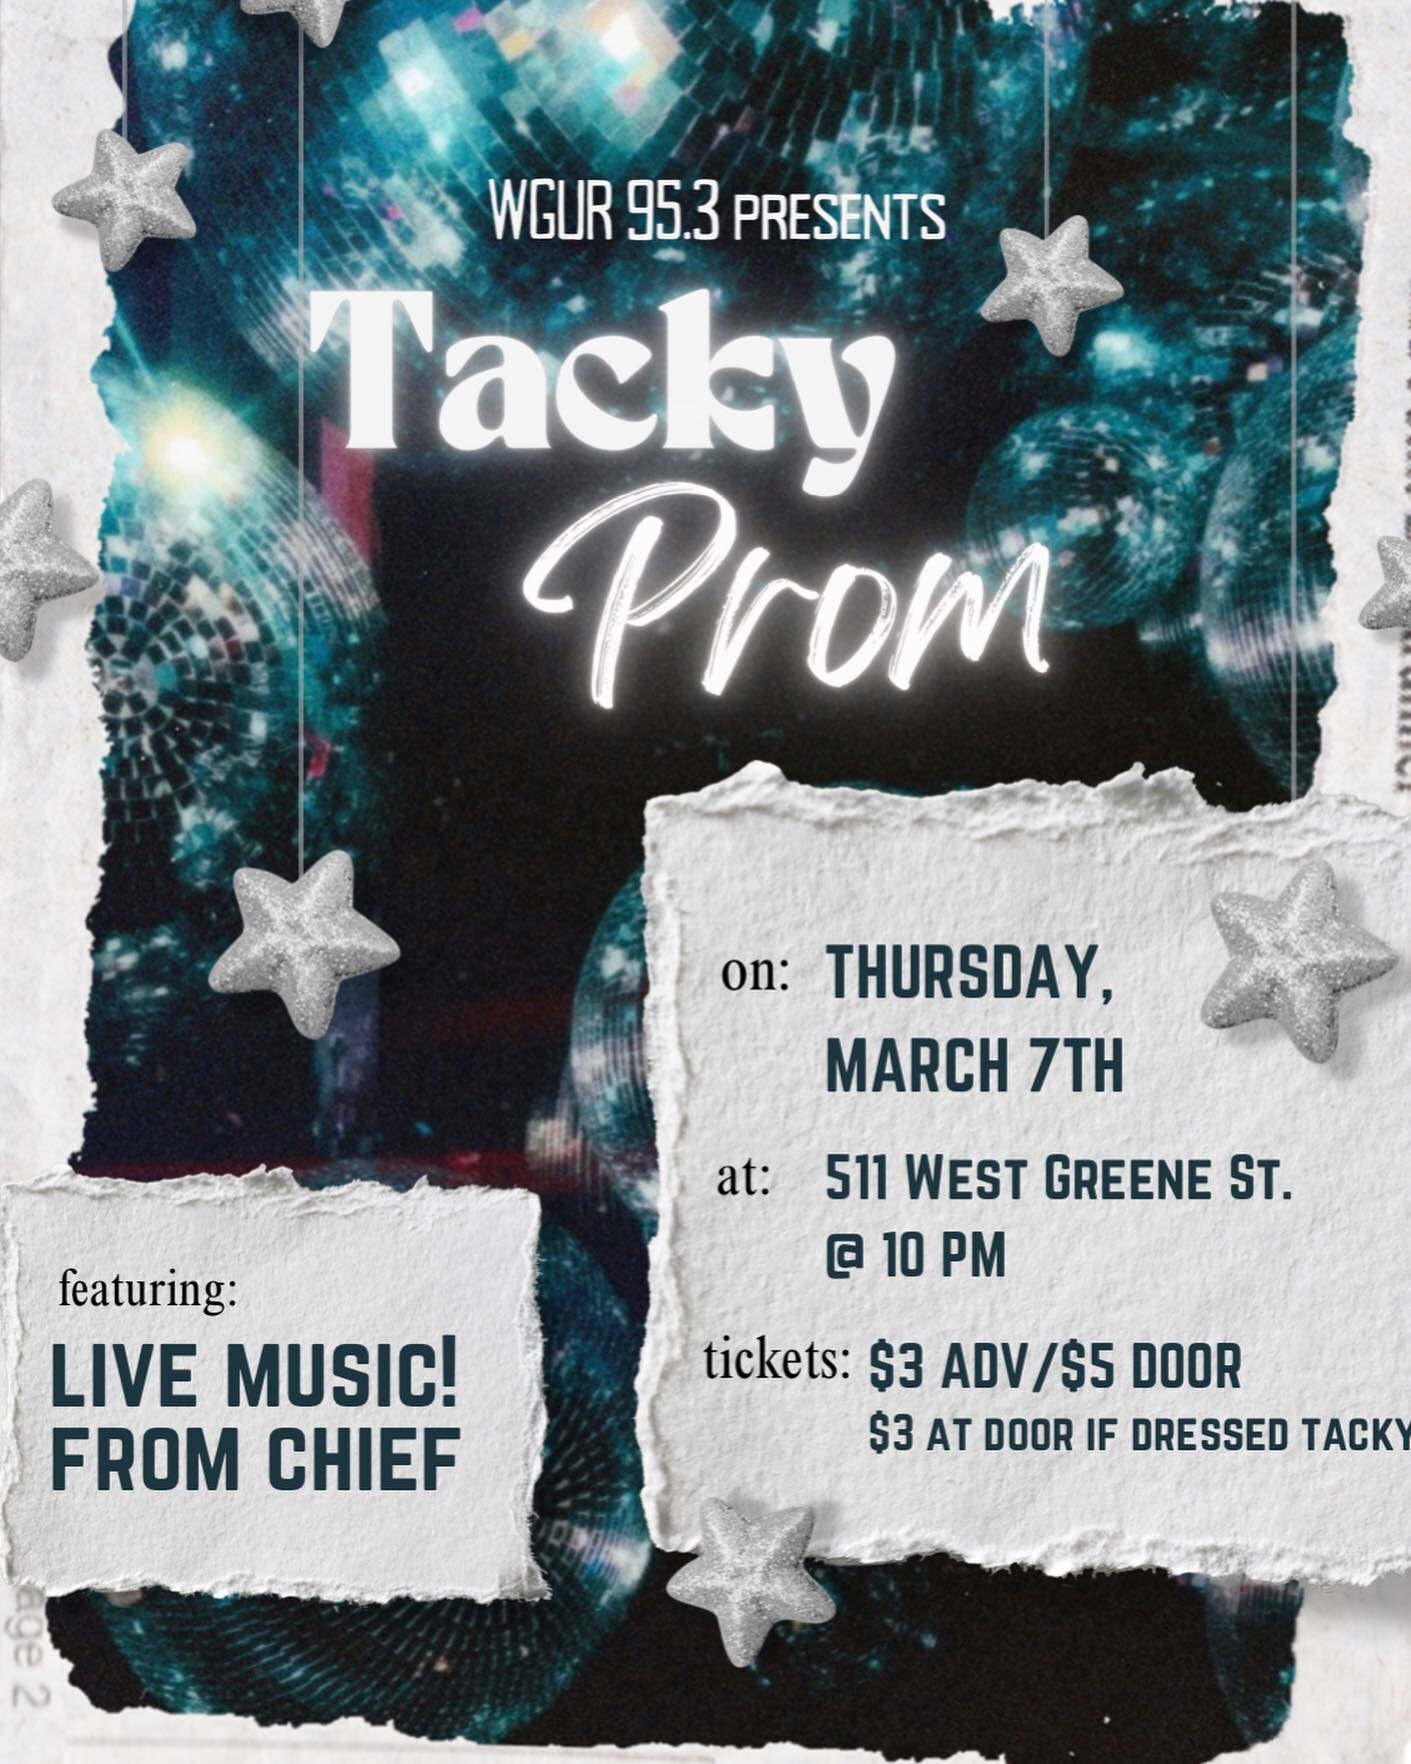 VENUE CHANGED TO 511 W. GREENE ST🎸
Bust out that powder blue tuxedo or that ugly chevron high low dress for WGUR&rsquo;s tacky prom this Thursday at 10pm at 511 W. Greene St!! Your favorite heart throb cover band Chief will be playing some 80s and 9